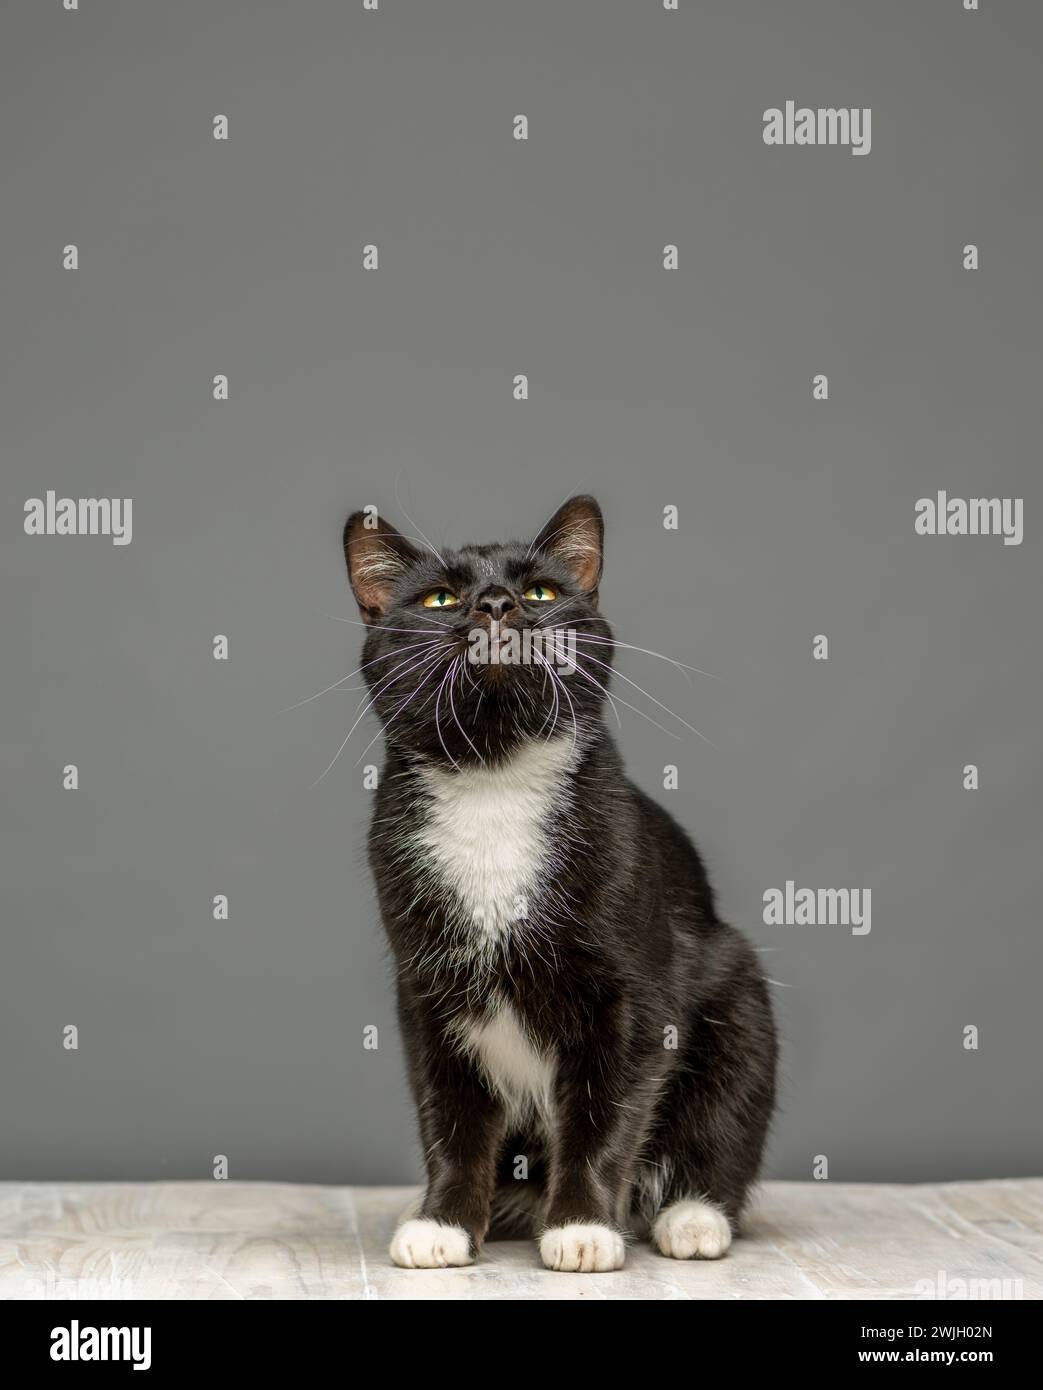 Studio shot of a black and white cat facing the camera looking upwards, sitting on a whitewashed table. Seen against a grey background. Stock Photo